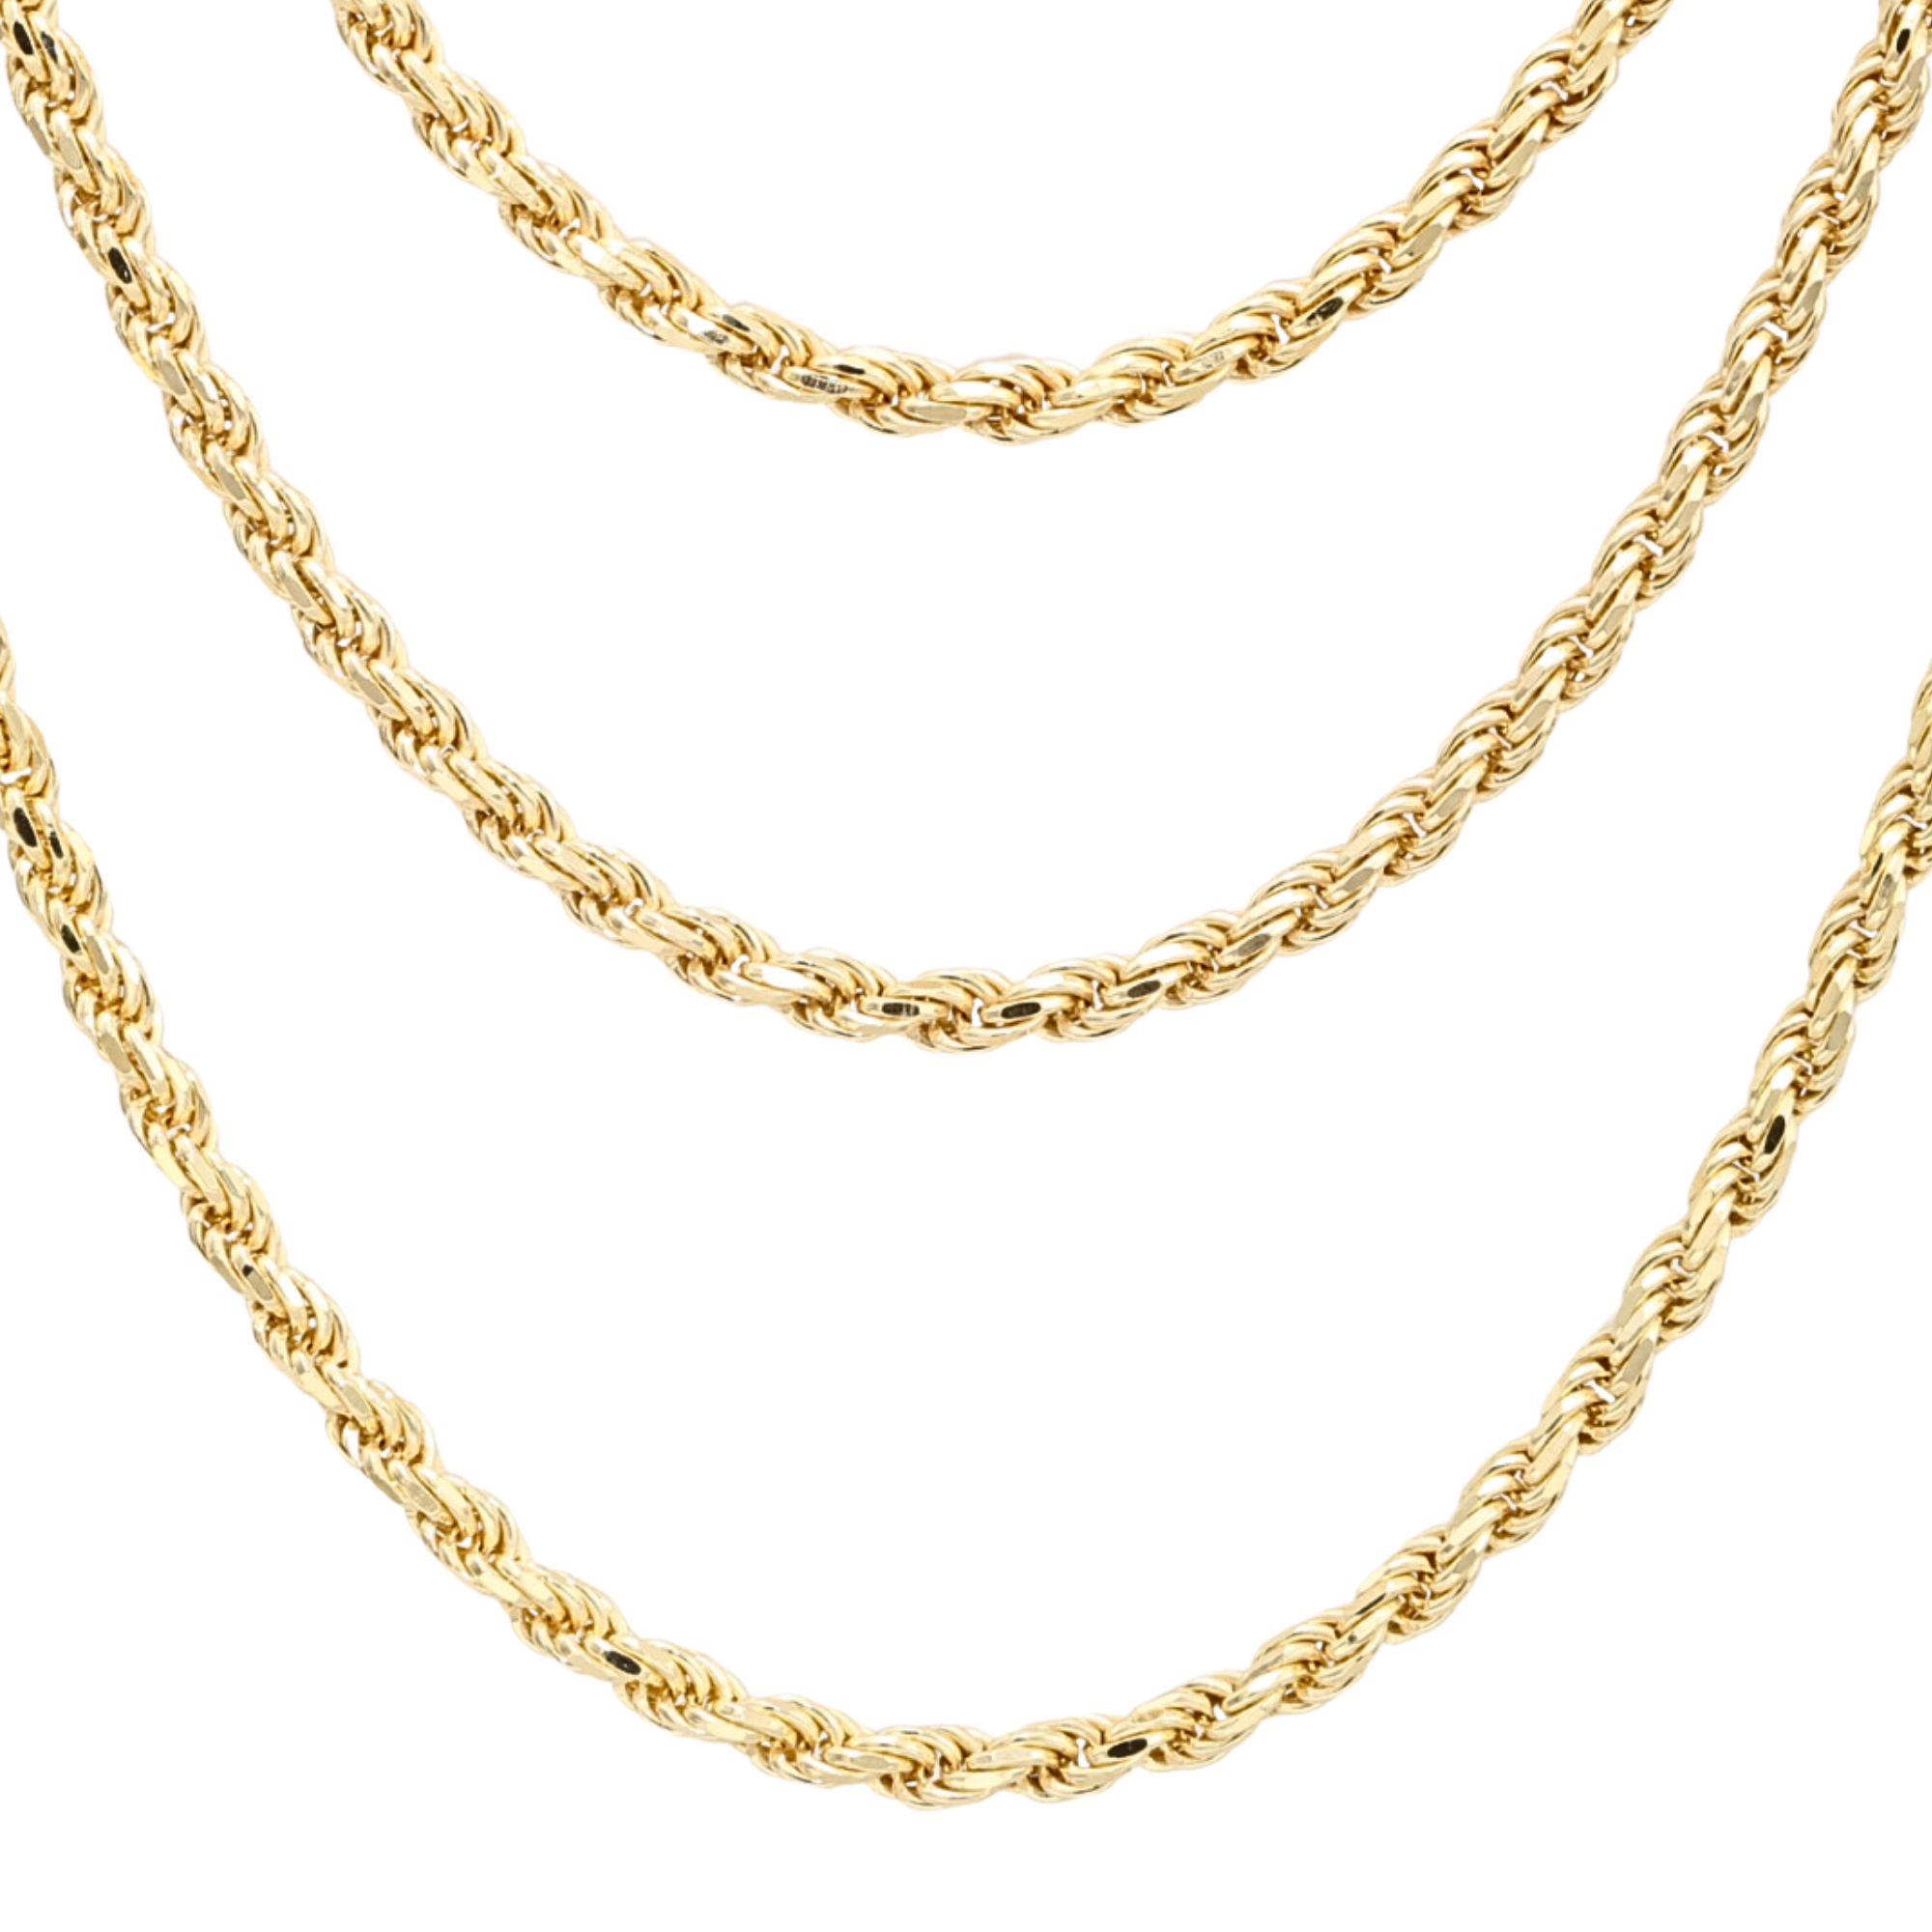 Rope Chains, Solid 925 Silver Dipped in 14k Gold in Sterling Silver